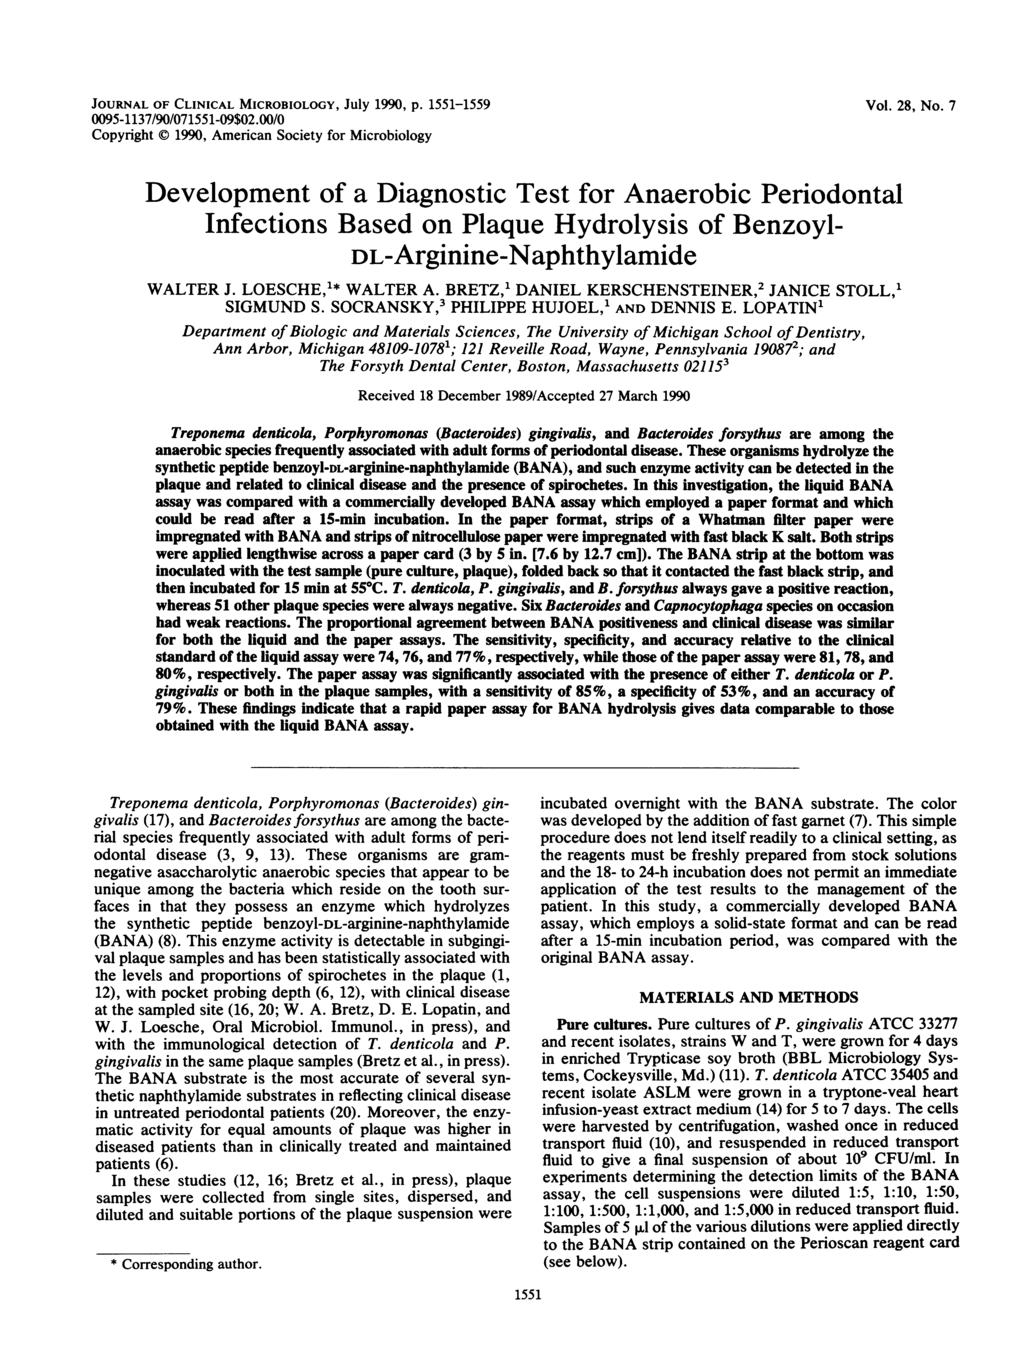 JOURNAL OF CLINICAL MICROBIOLOGY, July 1990, p. 1551-1559 0095-1137/90/071551-09$02.00/0 Copyright 1990, Americn Society for Microiology Vol. 28, No.